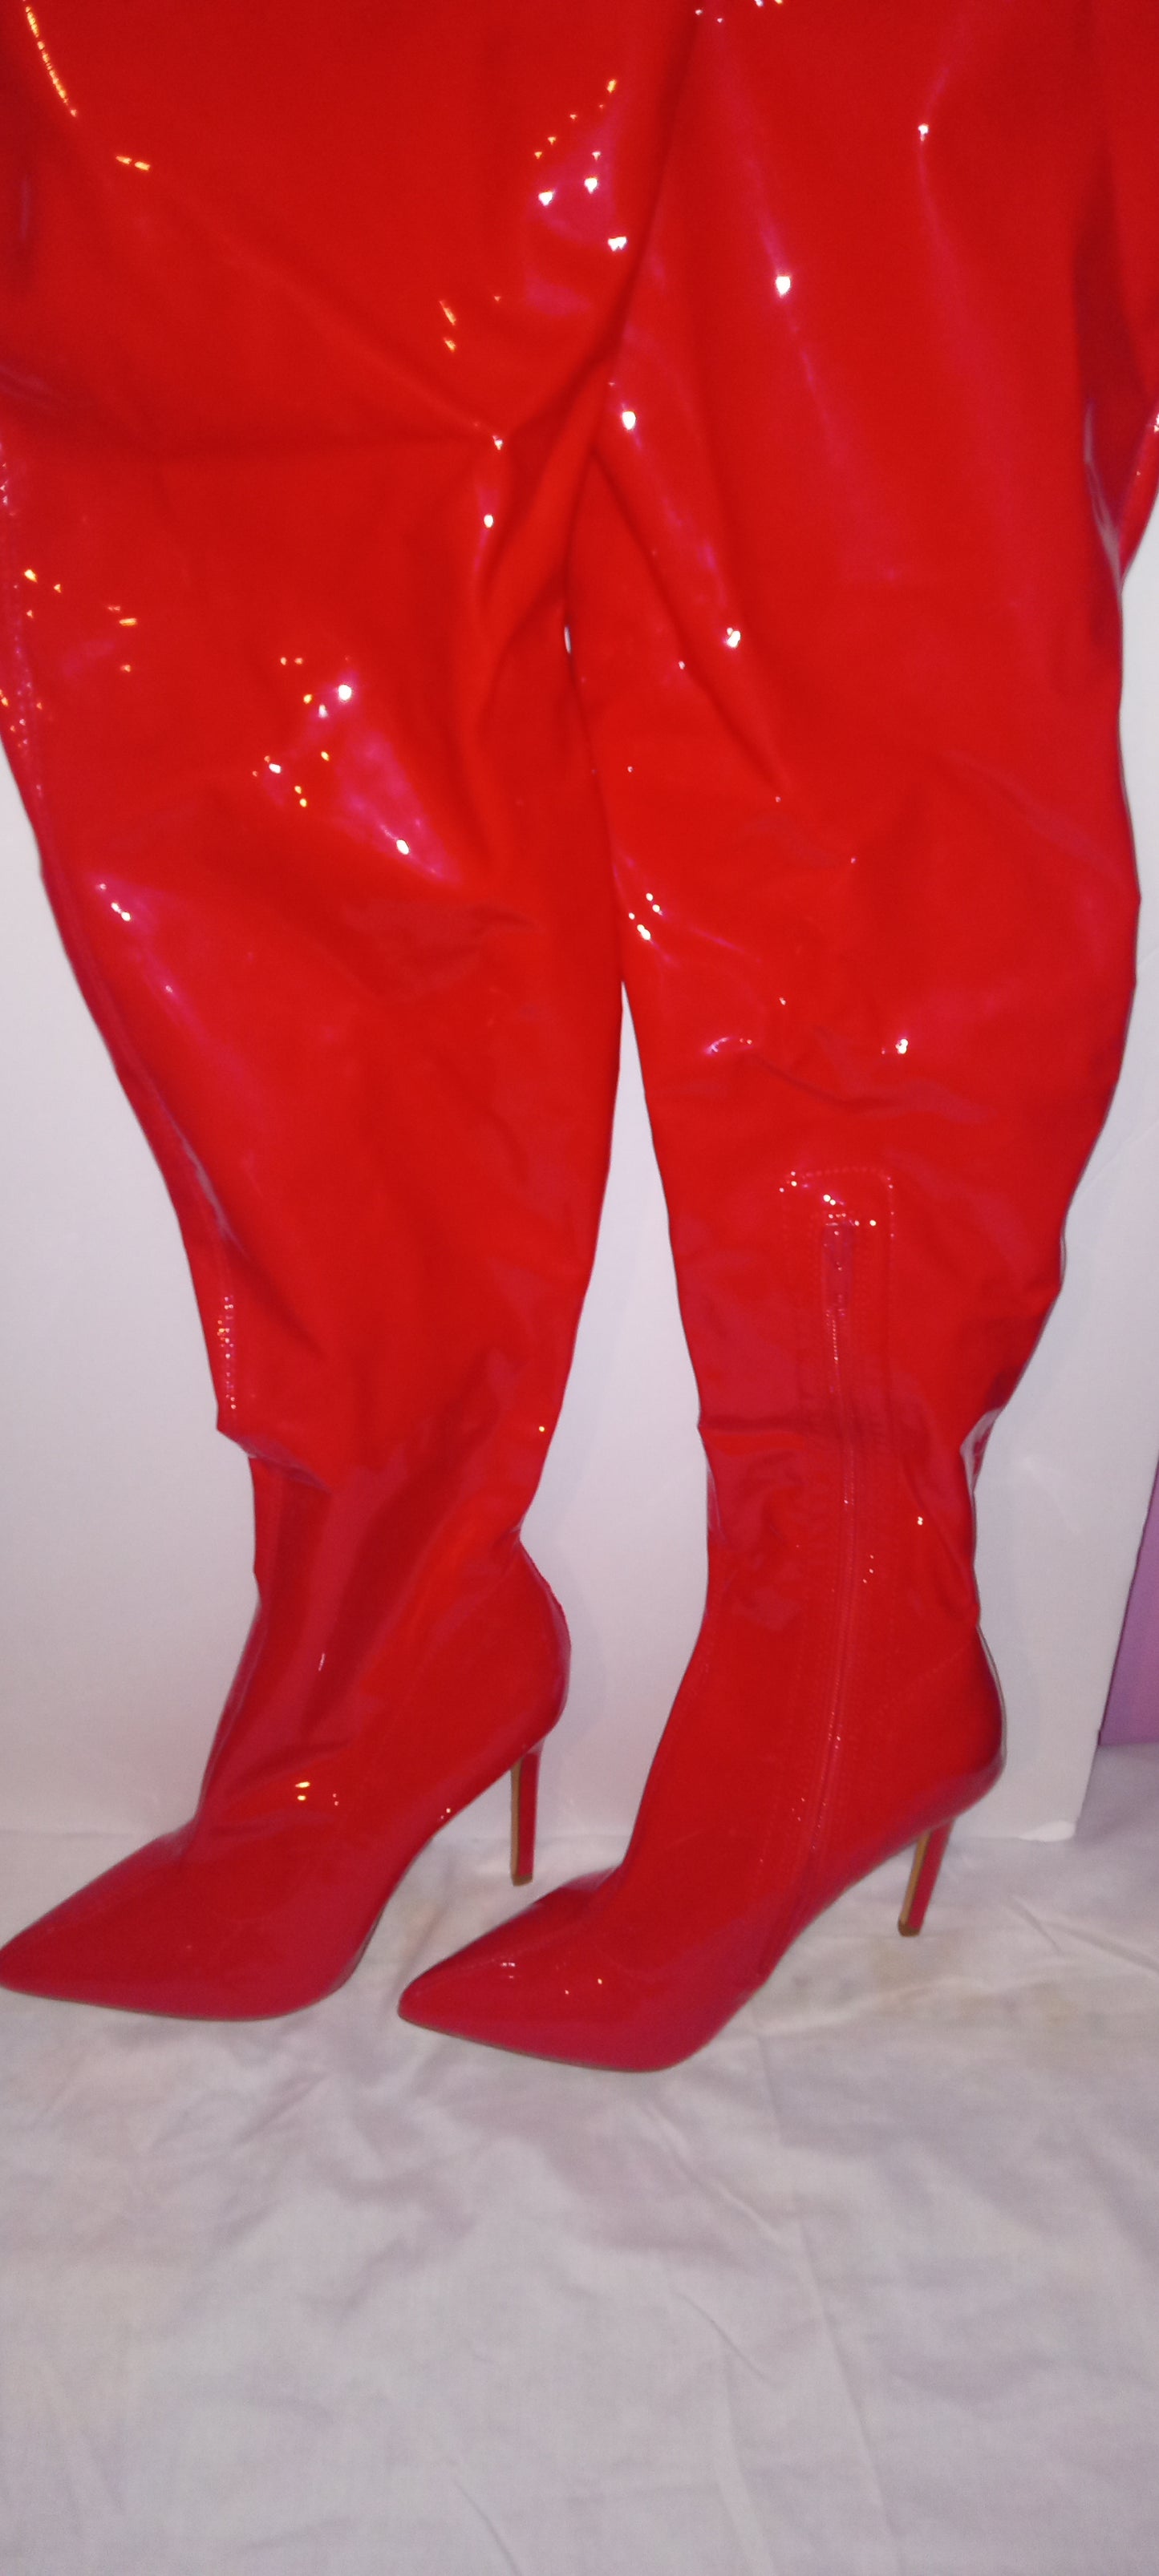 Shoes Woman Long Boots Red Used